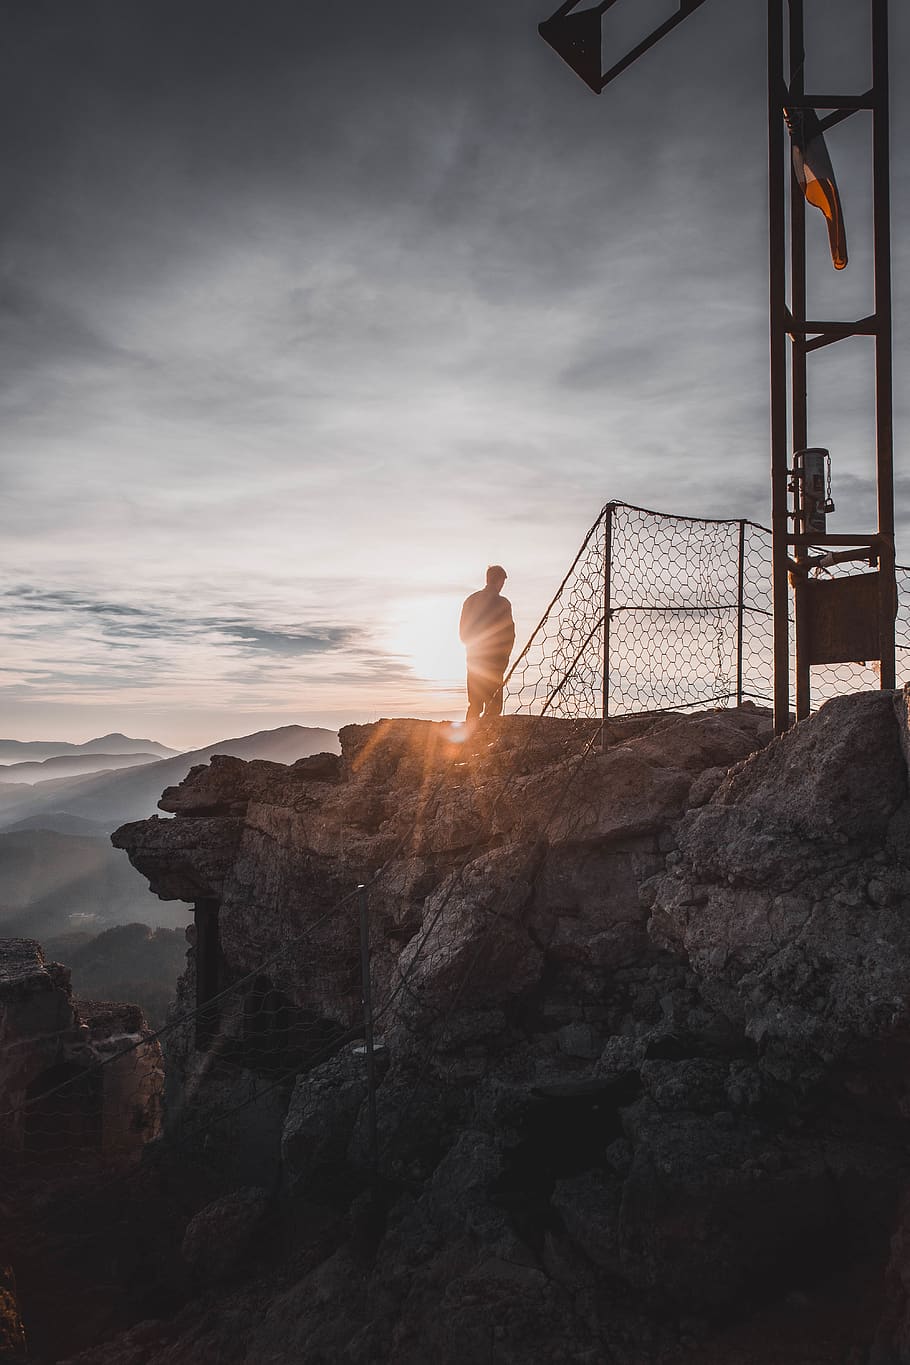 silhouette of man standing on cliff near metal fence, chair, furniture